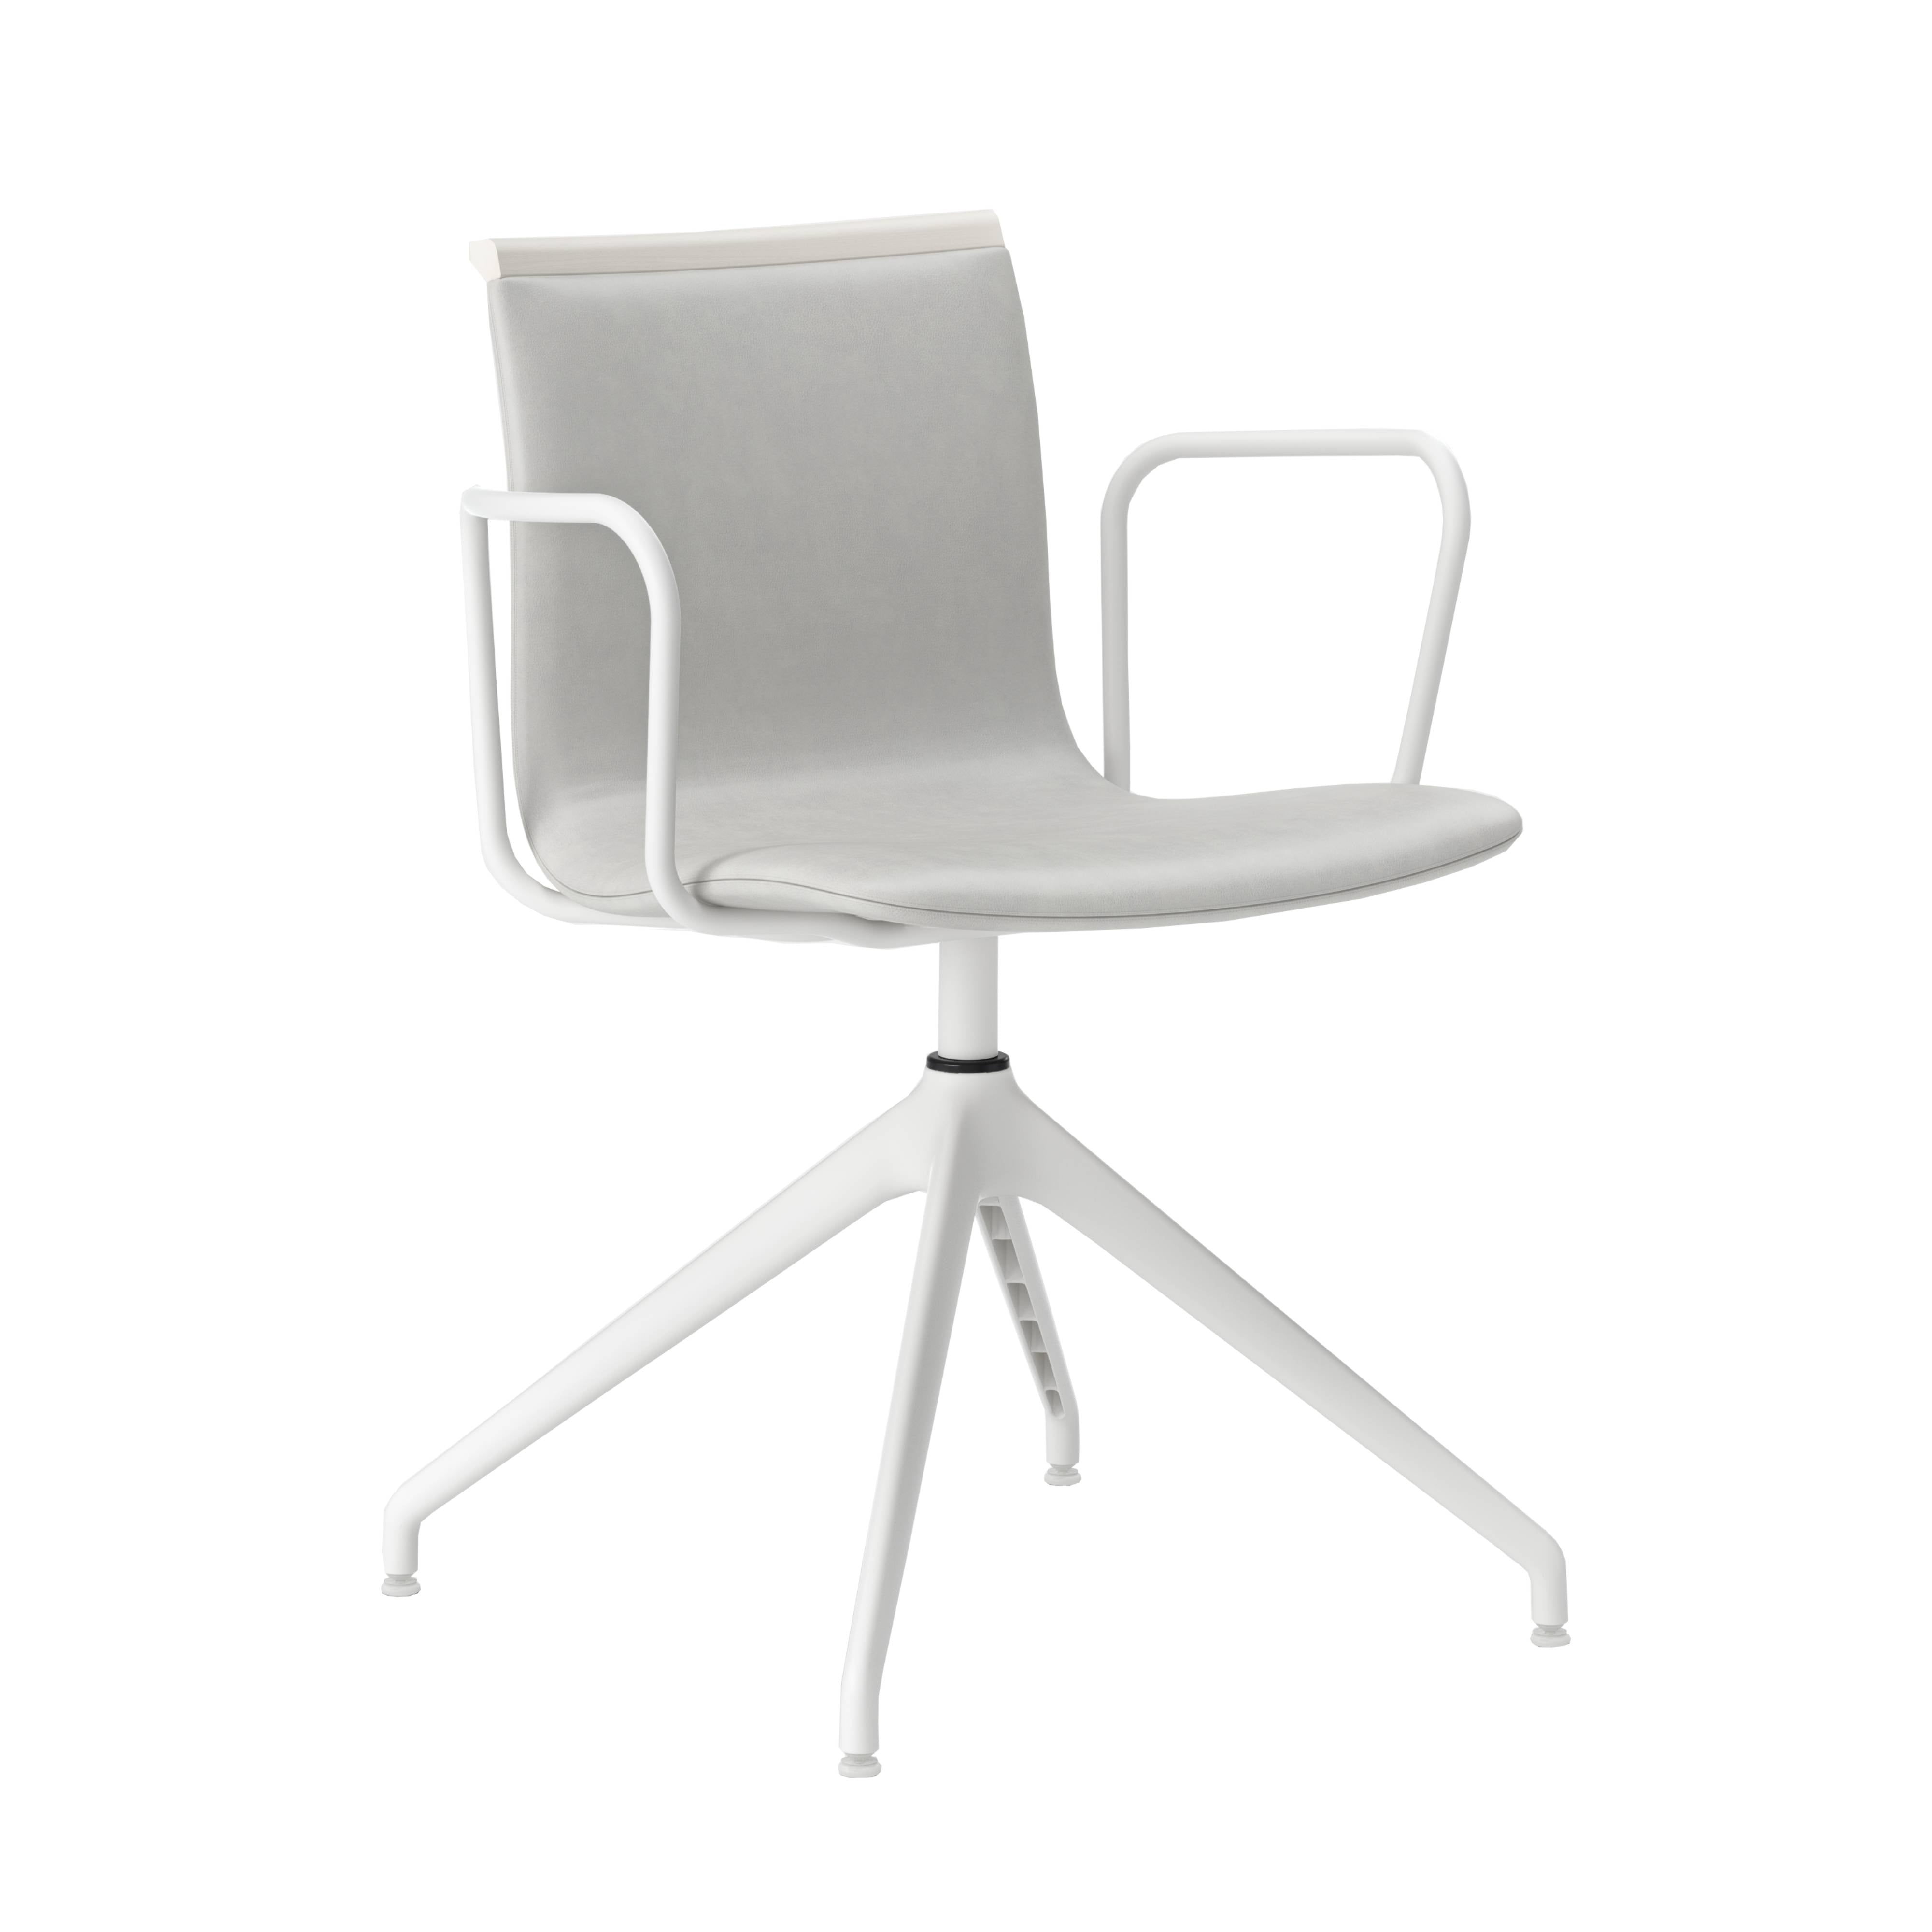 Serif Chair With Armrests: 4 Star Base + Upholstered